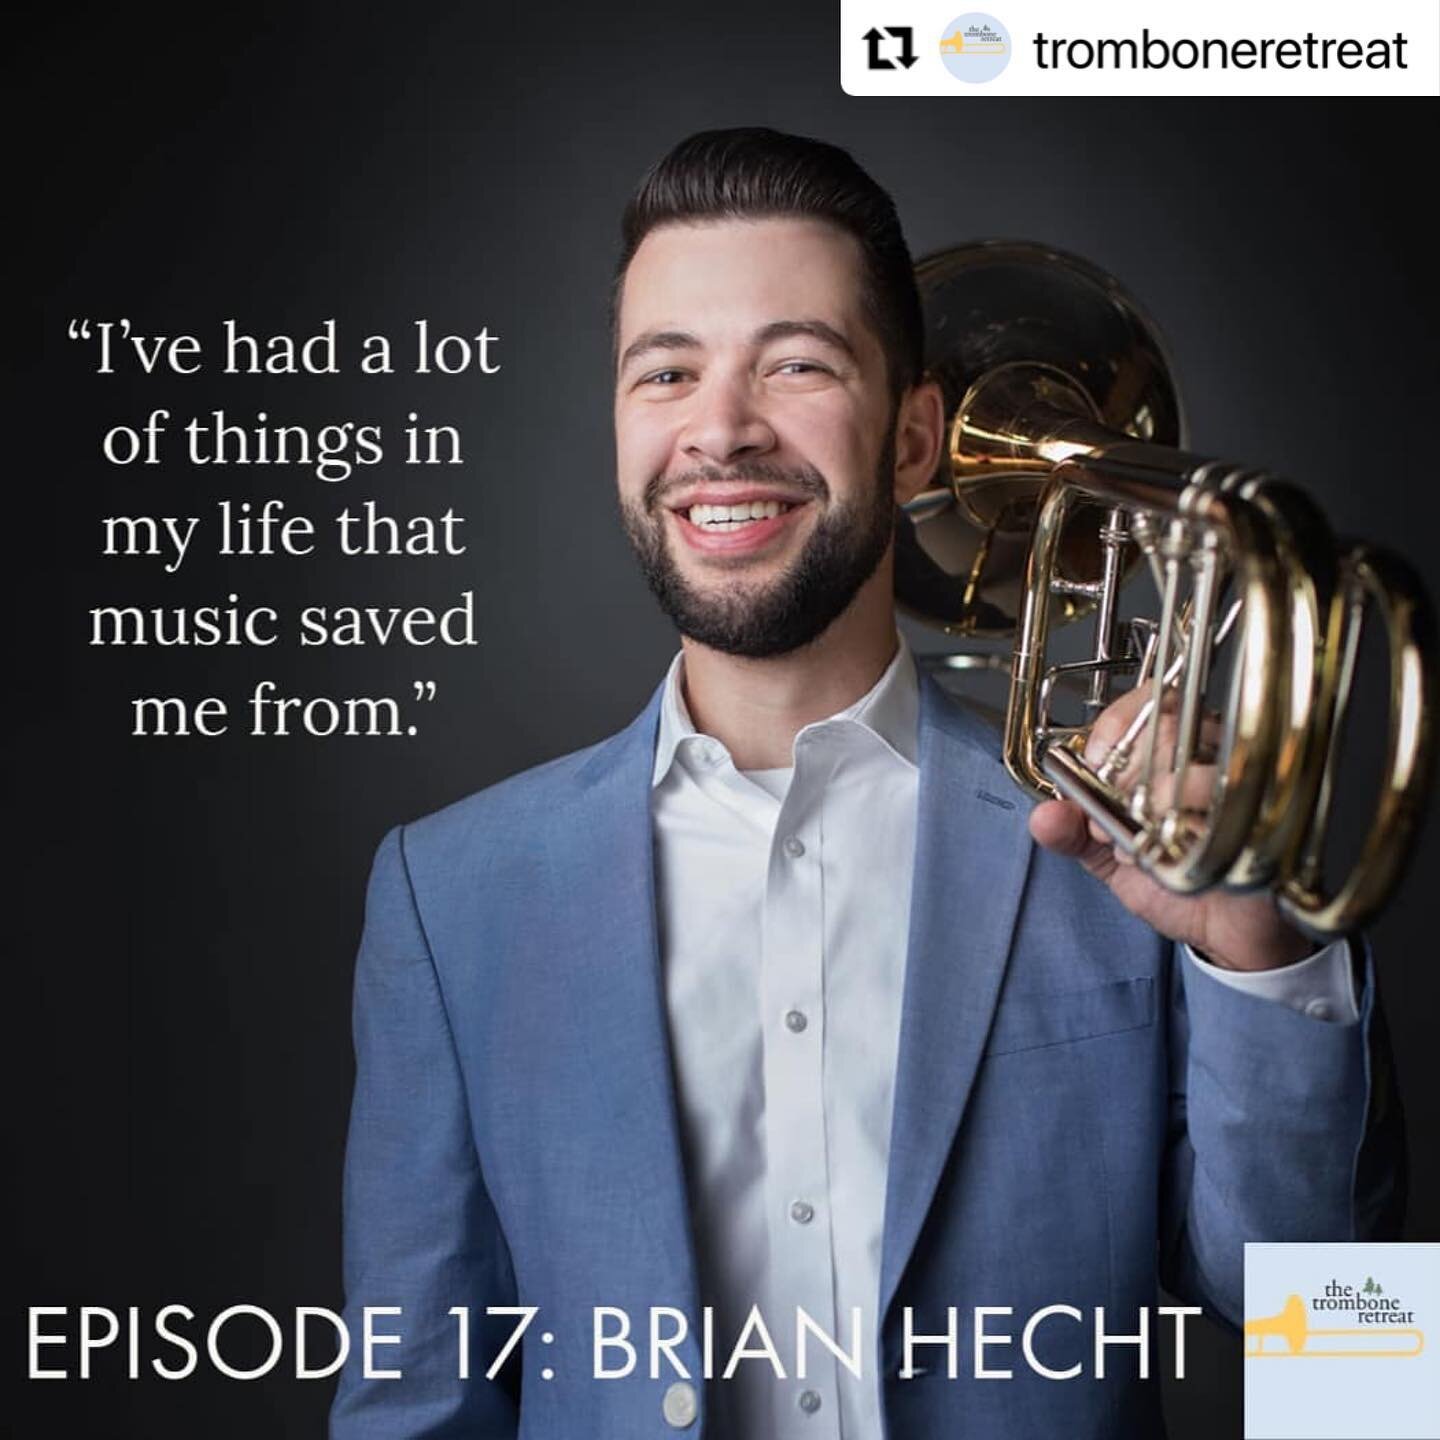 Repost @tromboneretreat
・・・
For our New Years episode of the Trombone Retreat podcast we talk to Brian Hecht, bass trombonist of the @atlantasymphony about surviving boot camp, what friends not to crash with before an audition and being honest with y